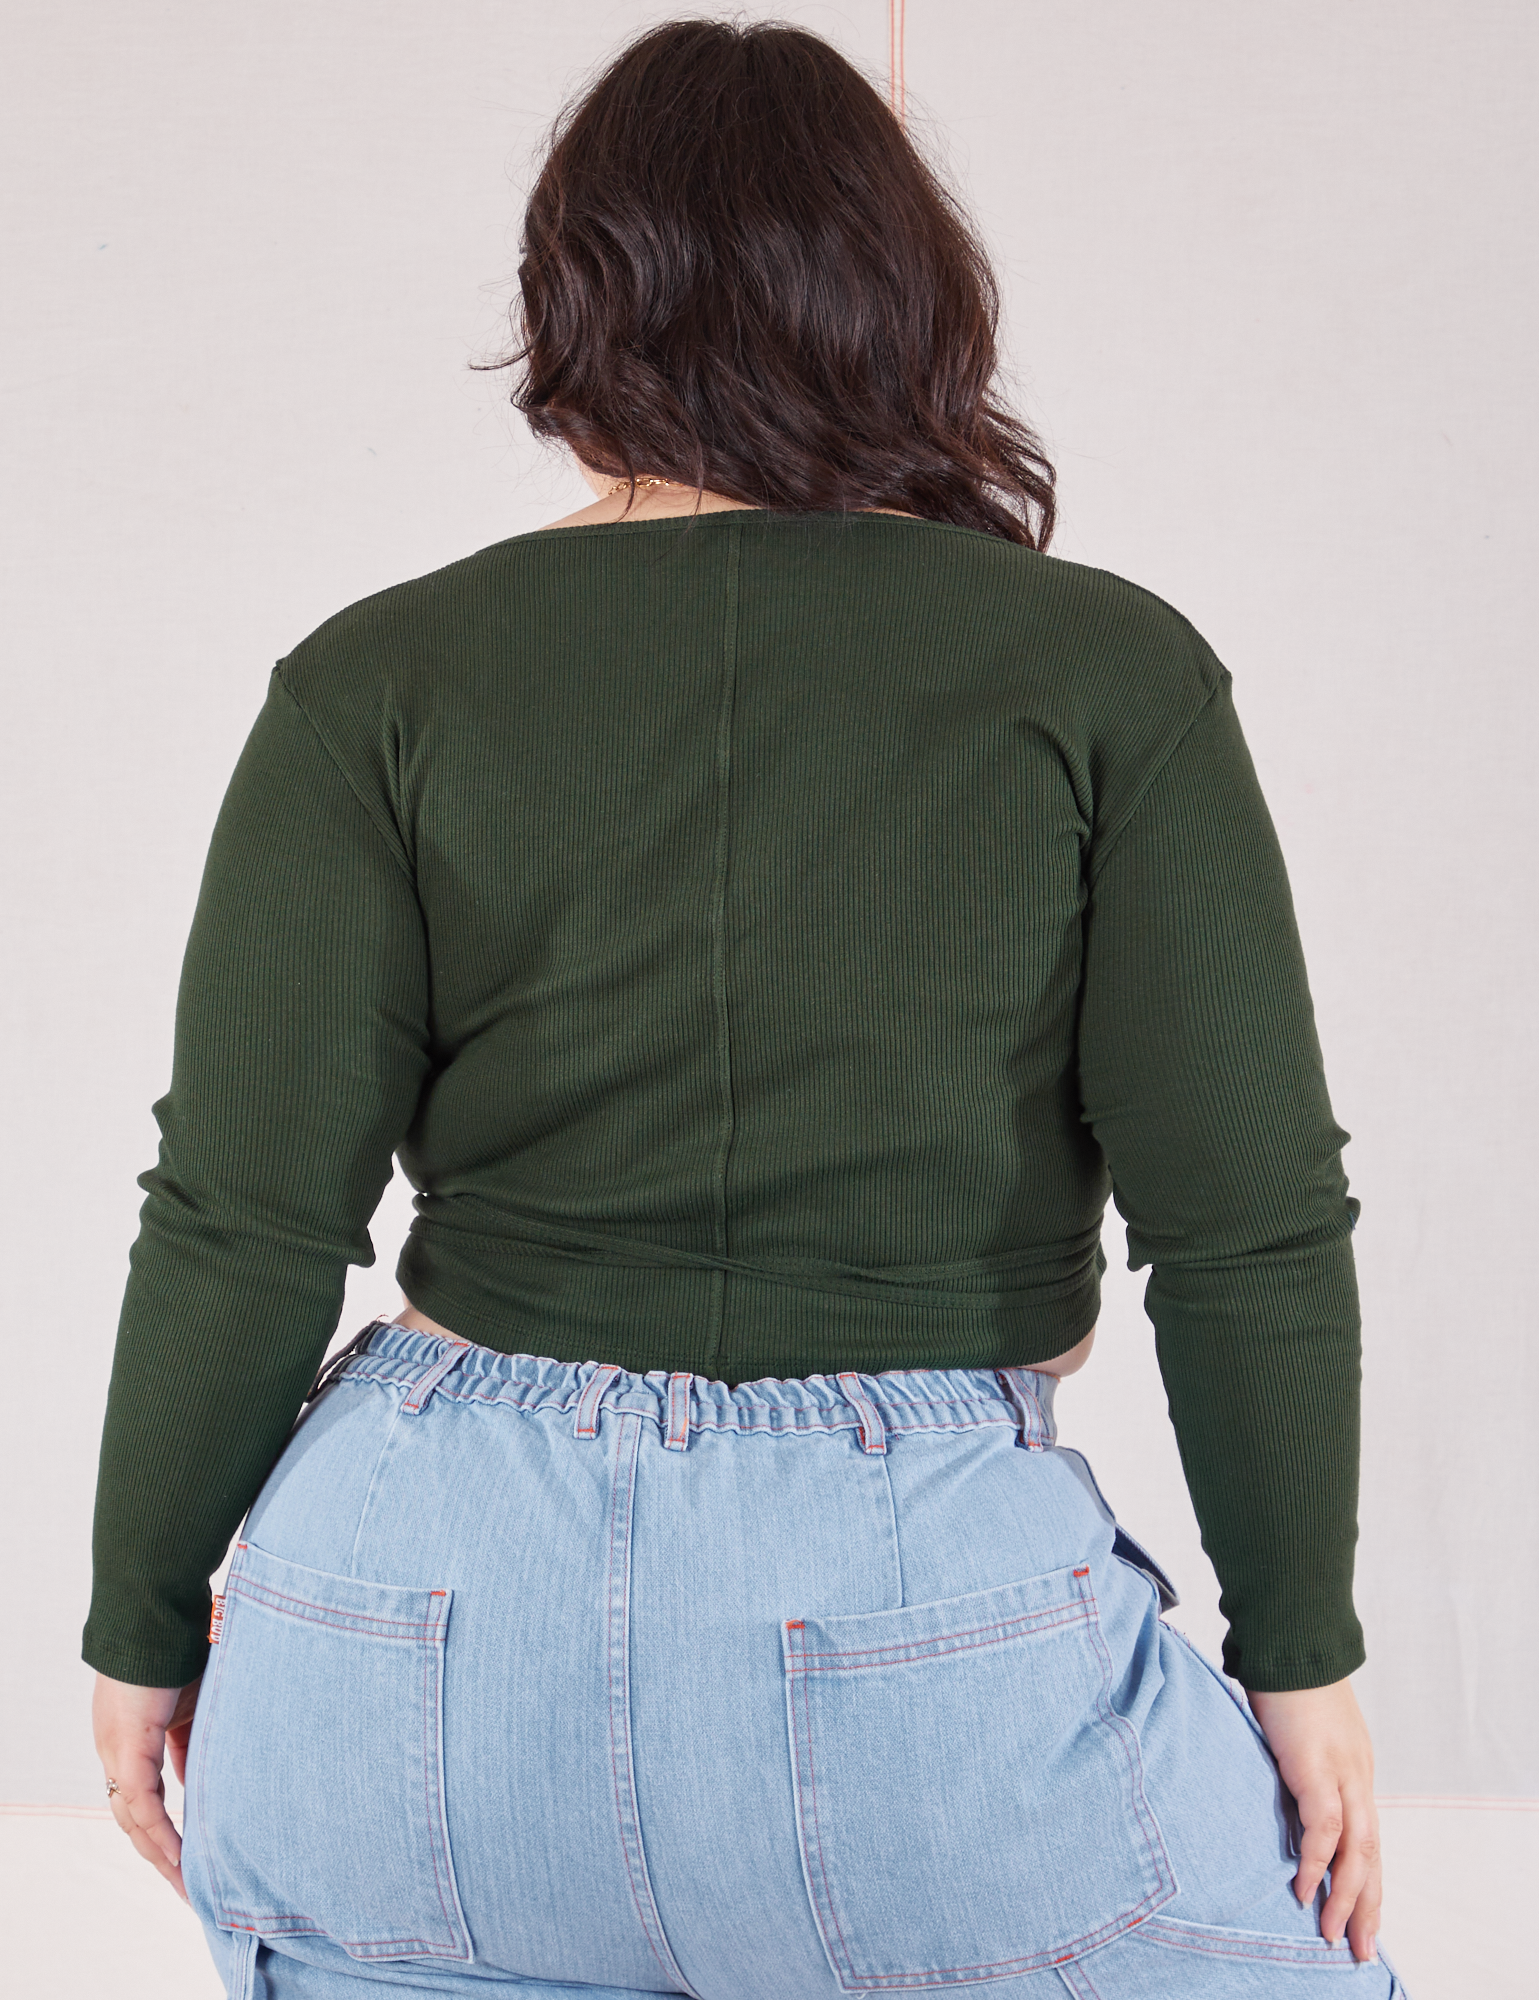 Wrap Top in Swamp Green back view on Ashley